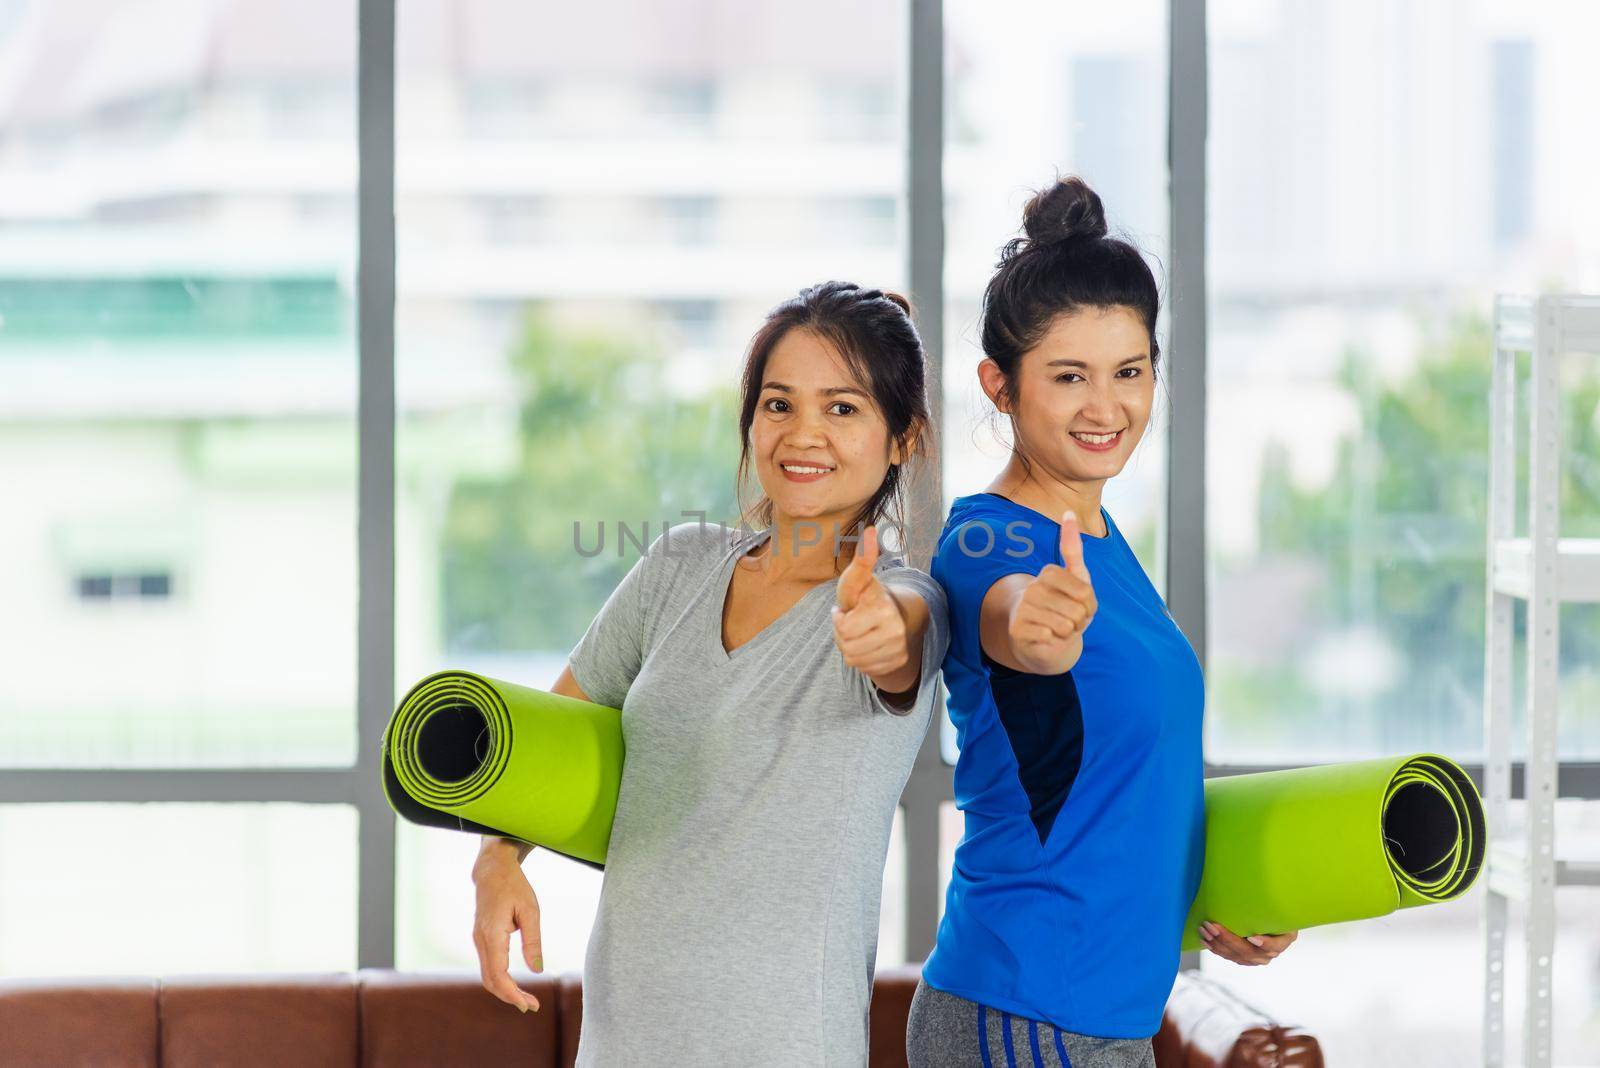 Asian adult and young woman smiling holding a yoga mat after yoga and exercise and show thumb up sign. Portrait of happy beautiful female hold yoga mat indoor studio, sport healthy workout concept